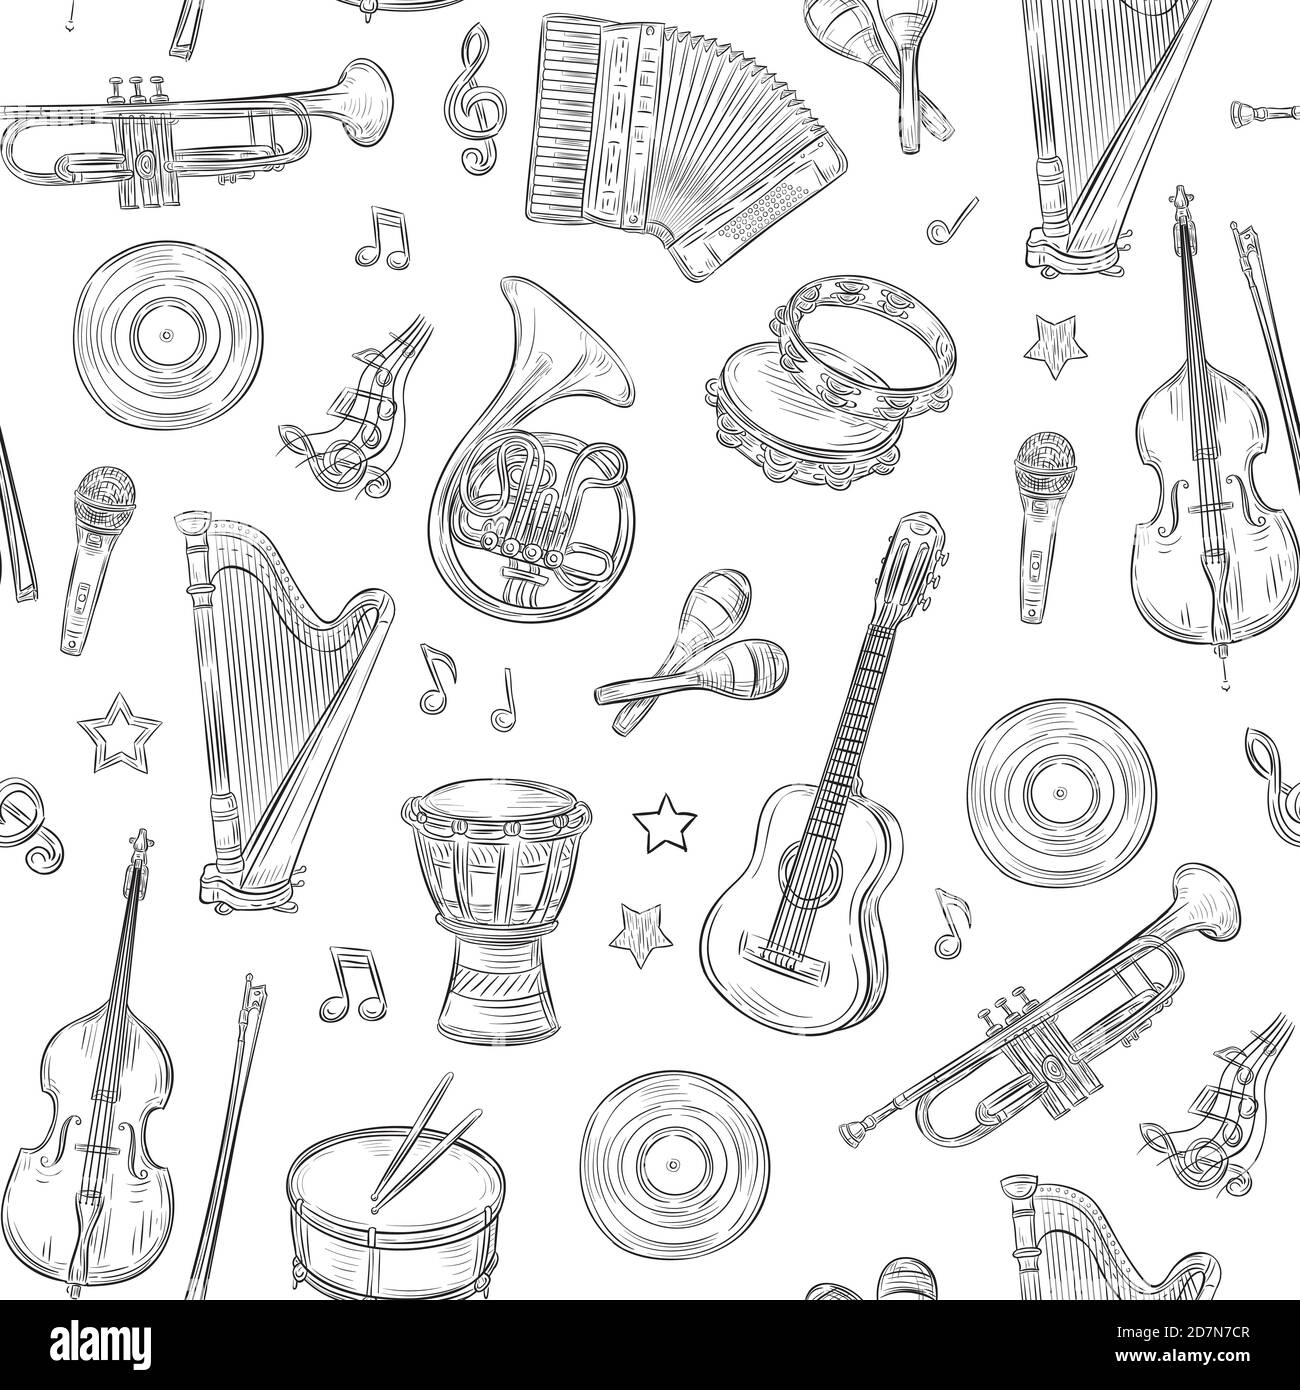 Vector Illustration Indian Classical Music Instrument Stock Vector (Royalty  Free) 1926333668 | Shutterstock